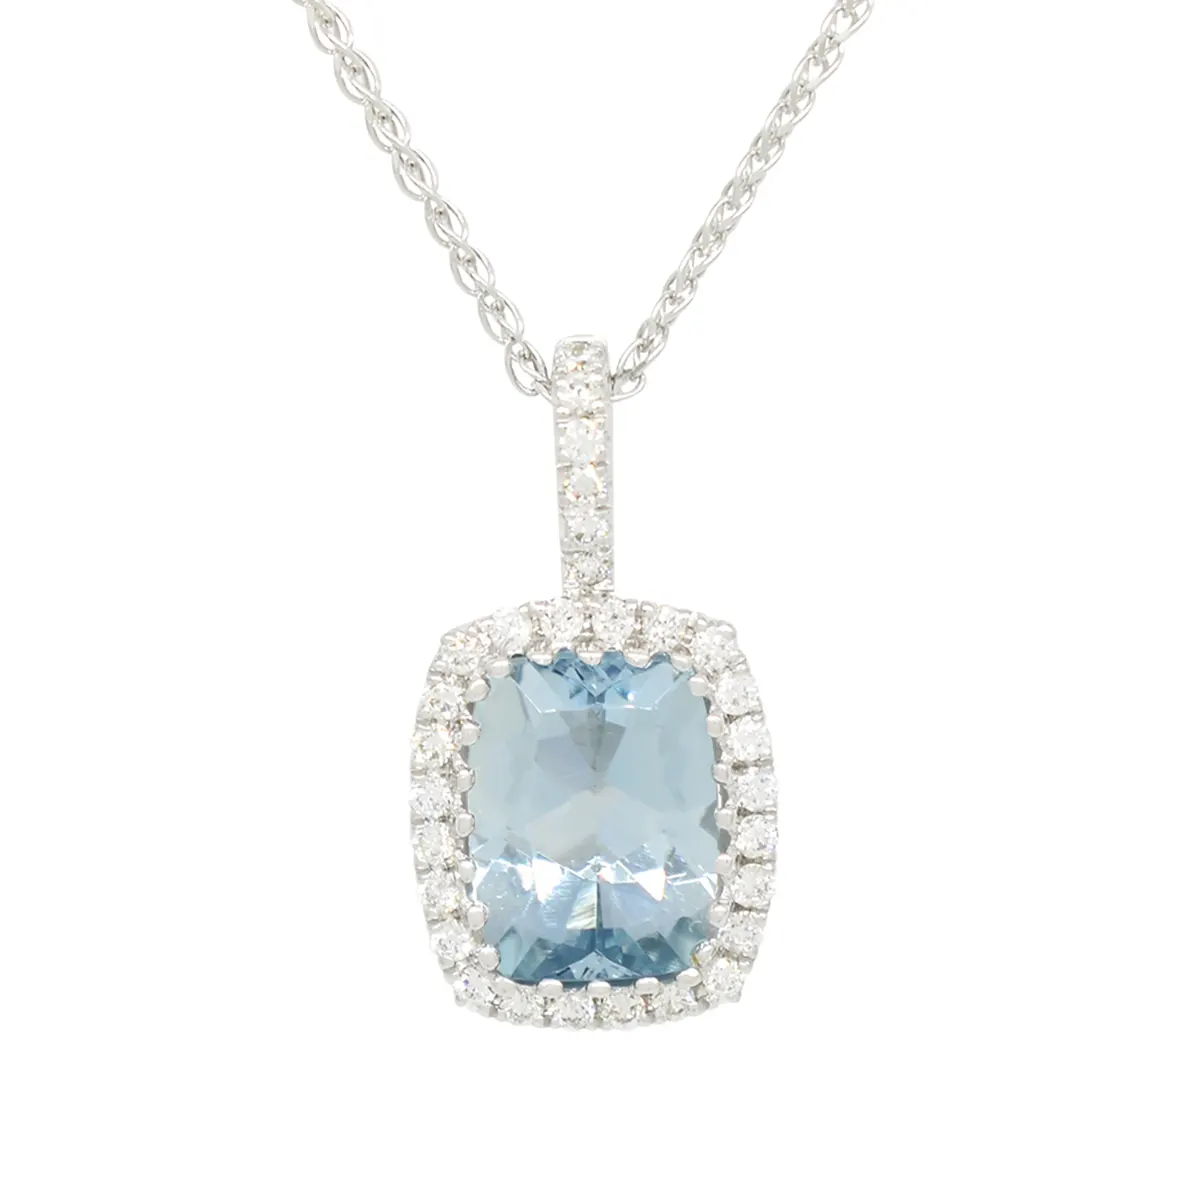 Aquamarine and diamond necklace in 14K white gold with 1.64 Ct. cushion cut natural aquamarine and 0.18 Ct. total weight in 30 genuine round cut diamonds